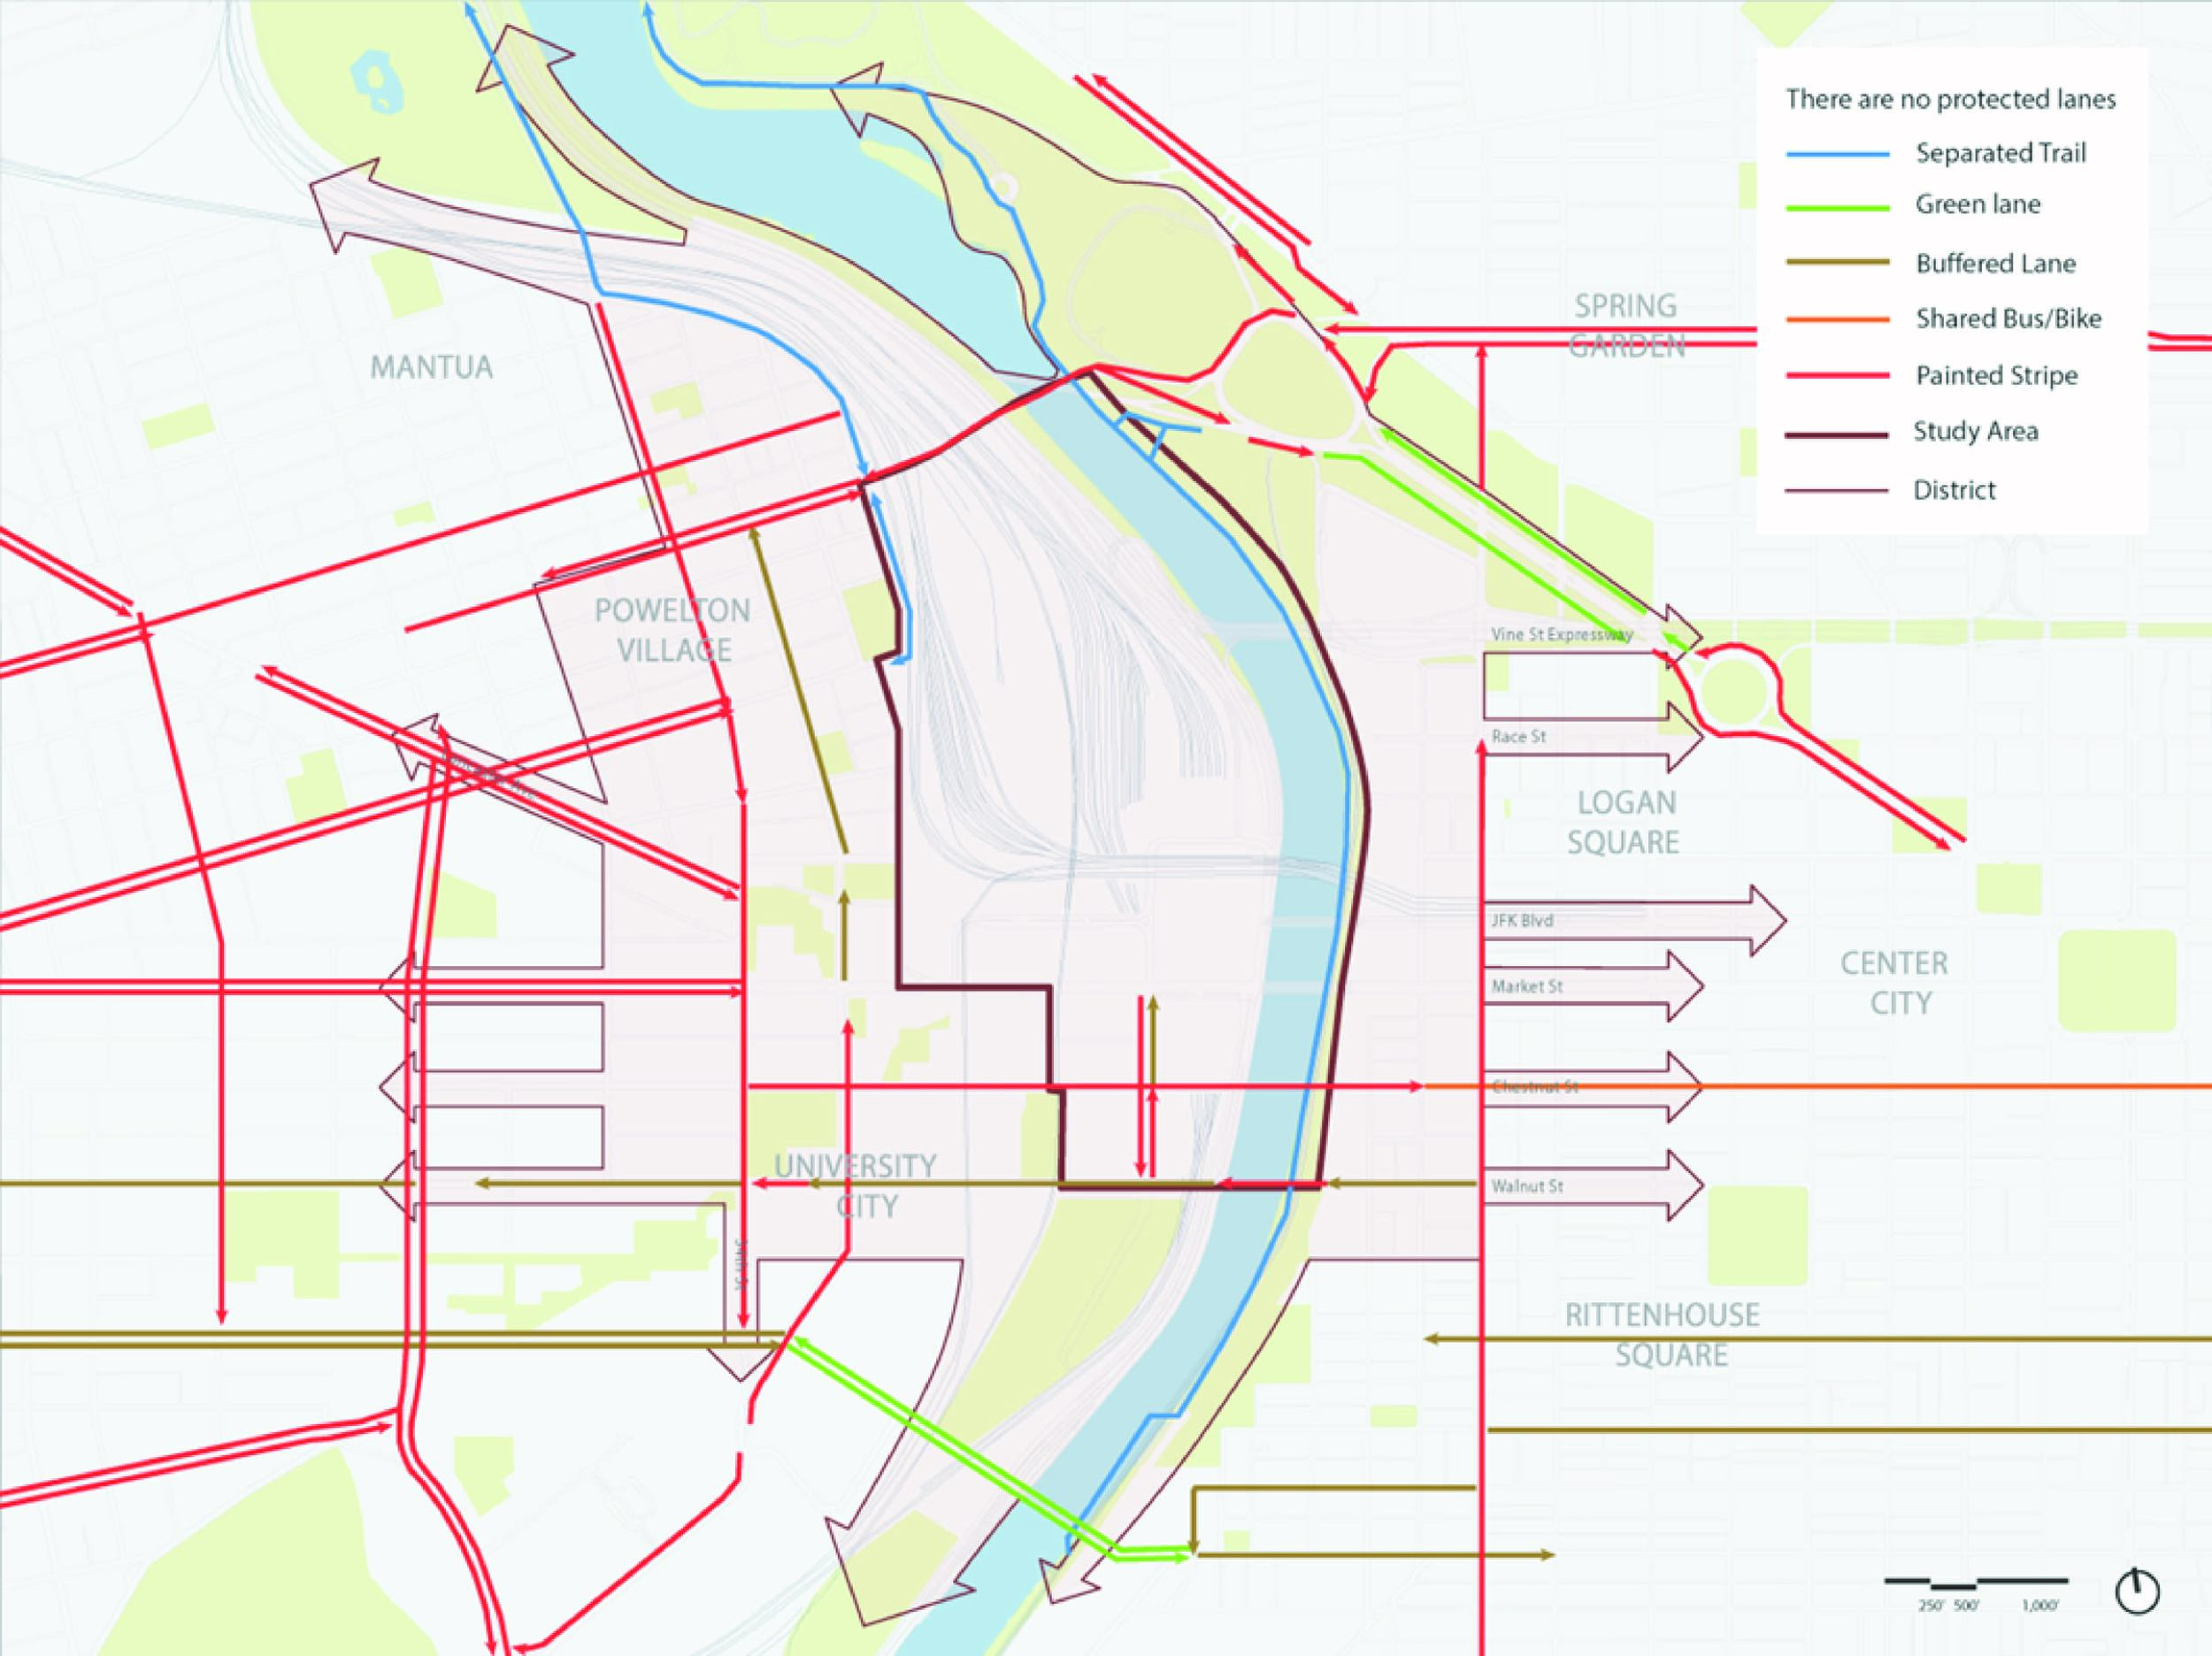    Bicycle Network:    The District’s bicycle network extends through much of the study area however there are critical gaps that must be filled to complete the network.&nbsp;  